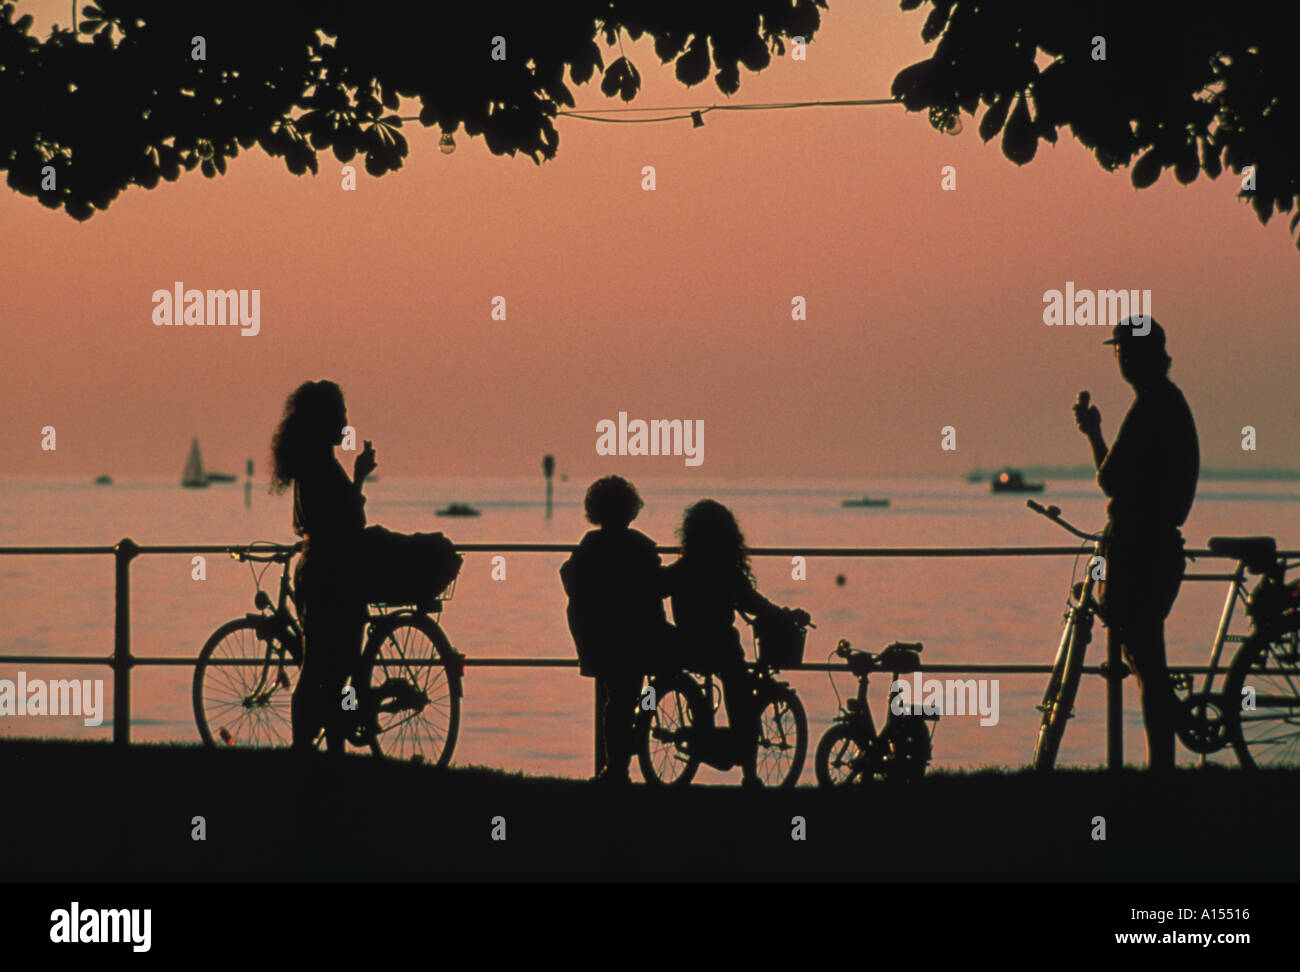 Family on bicycles silhouetted against an orange sky at dusk enjoying the view and eating ice cream Stock Photo